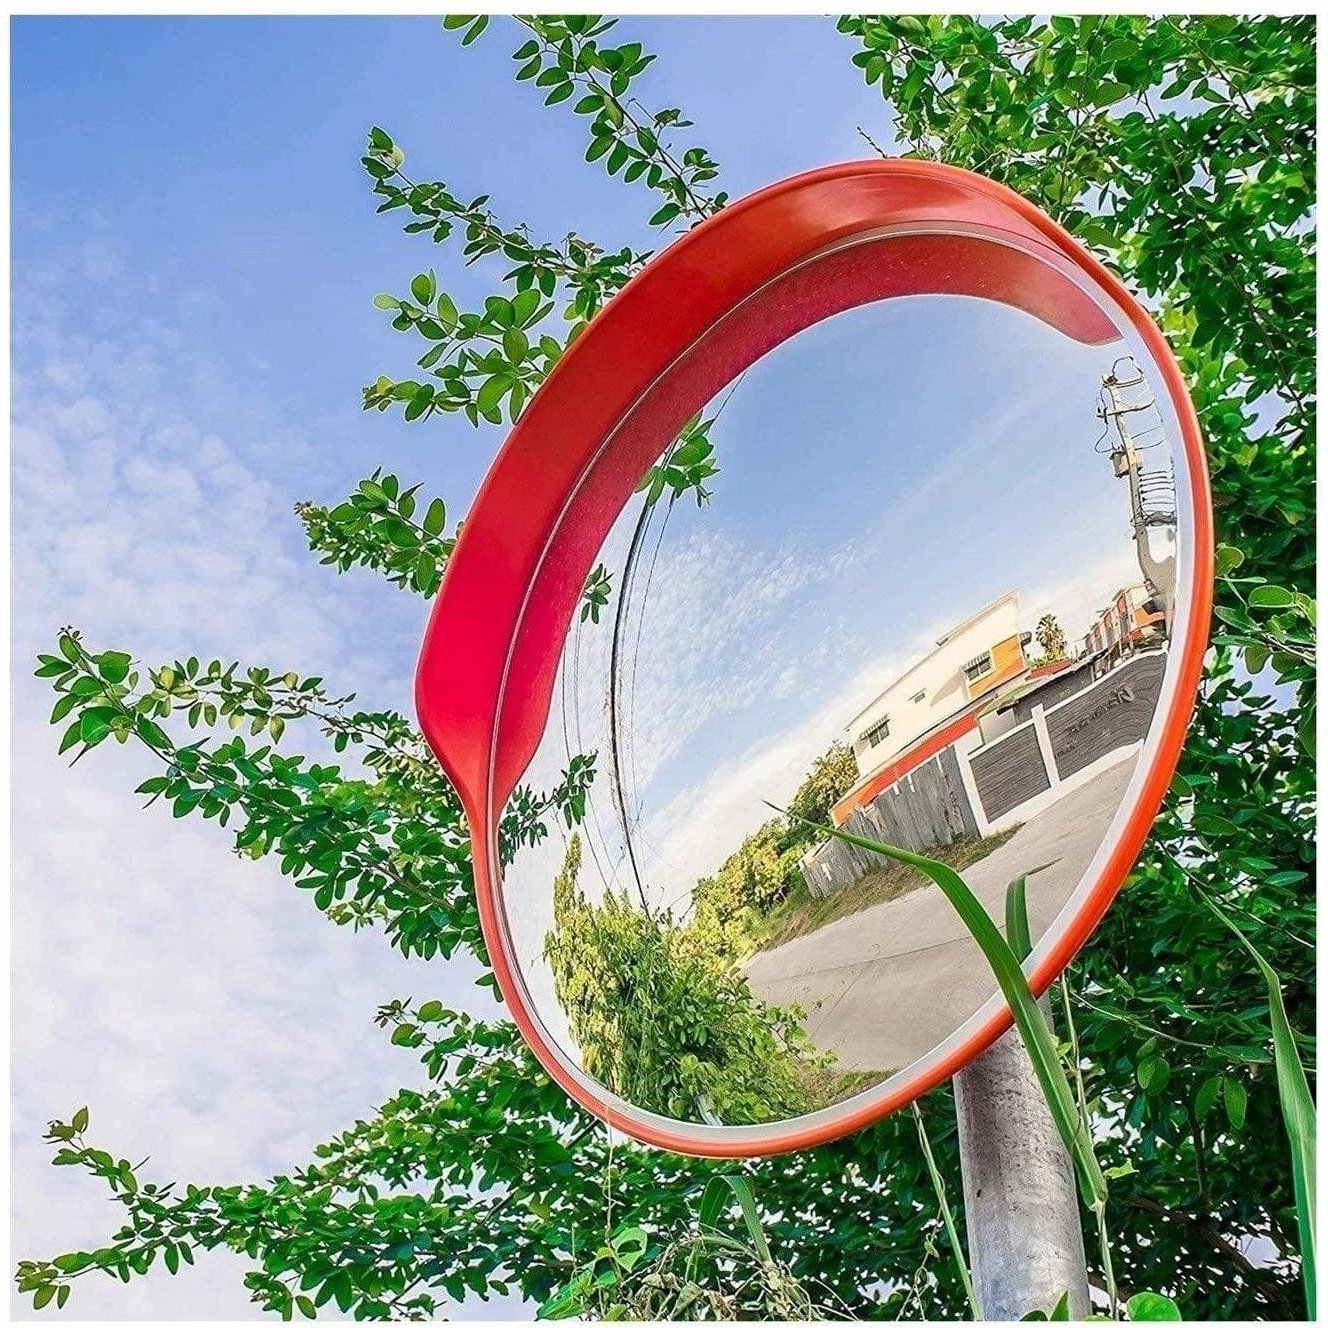 Convex Wide-Angle Safety Mirror - 60cm & 80cm supply-master